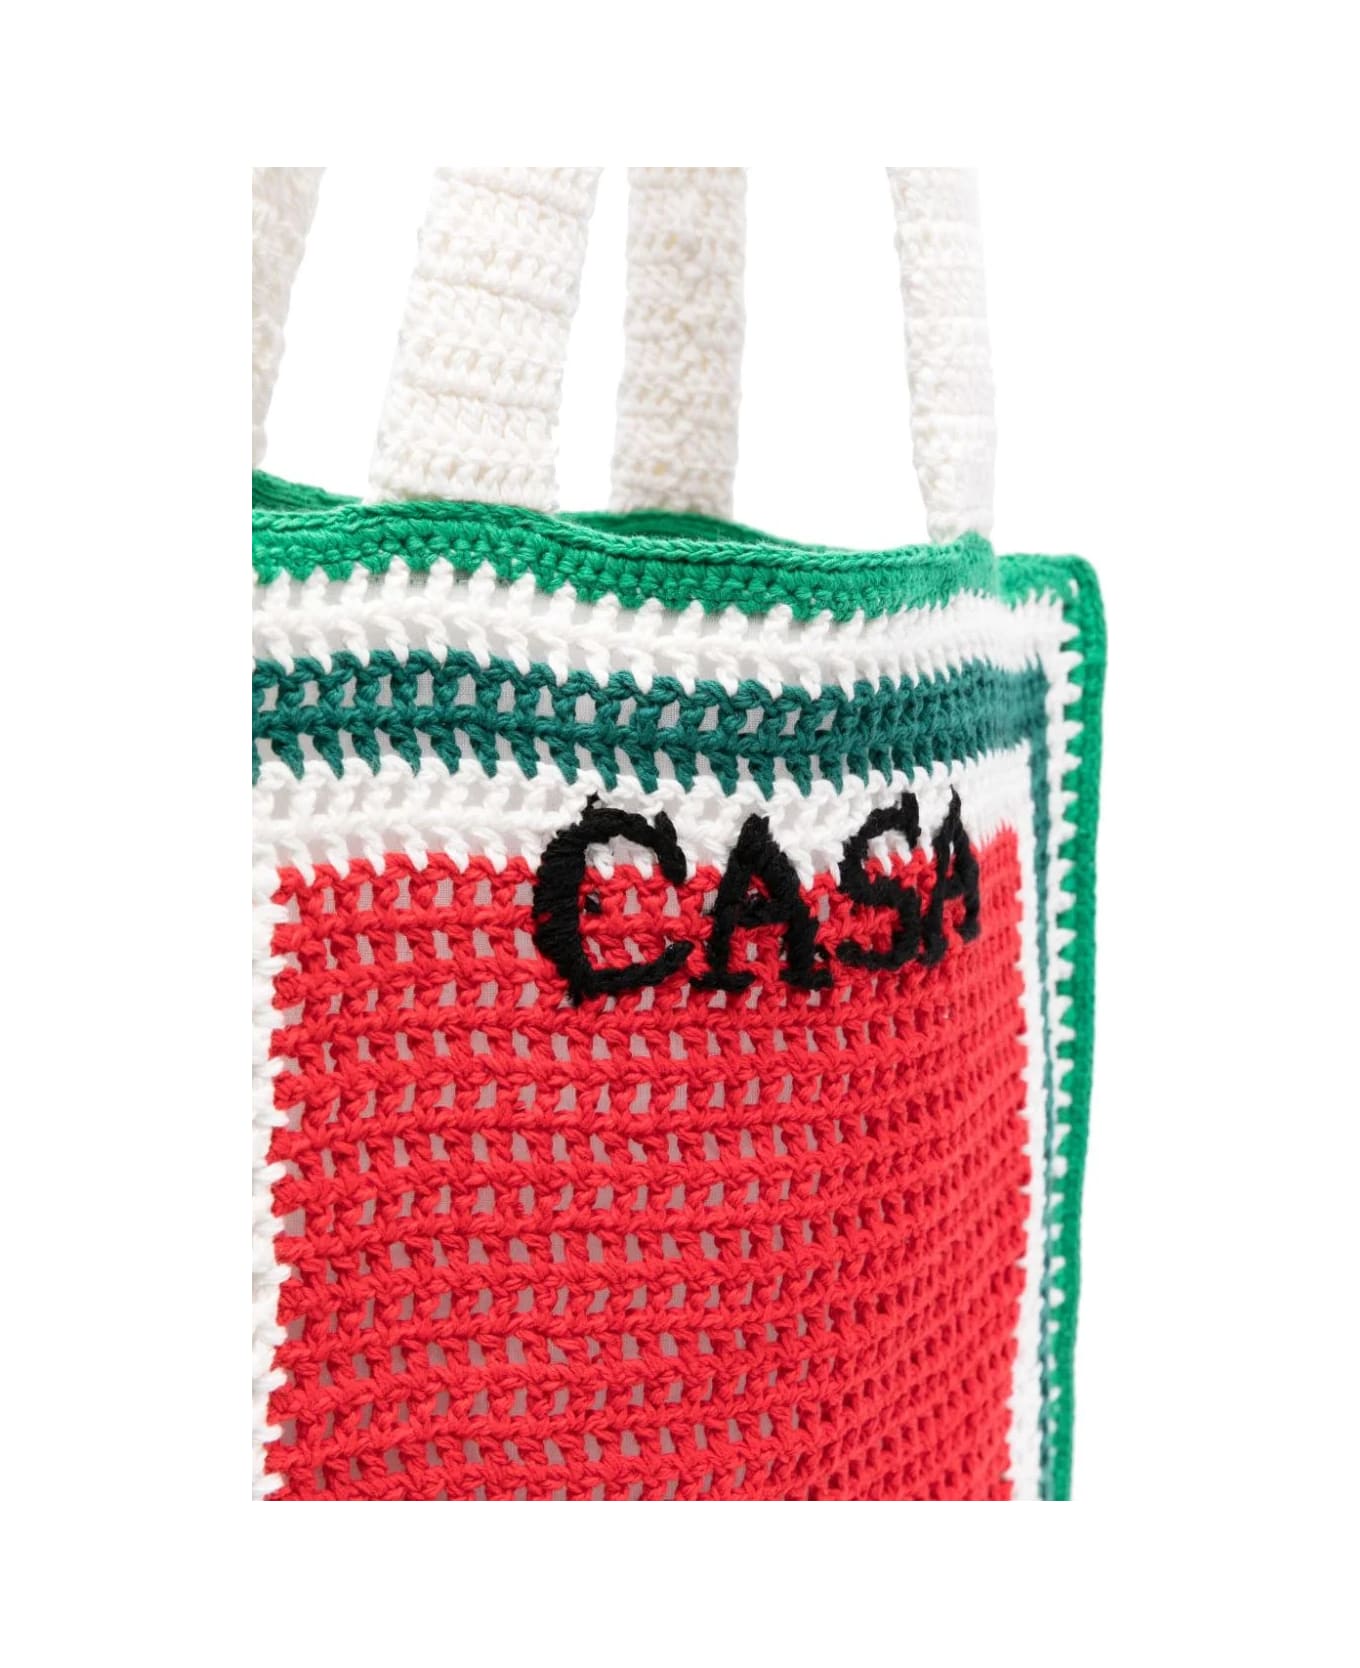 Casablanca Crocheted Atlantis Tote Bag In Green, Red And White - Red トートバッグ